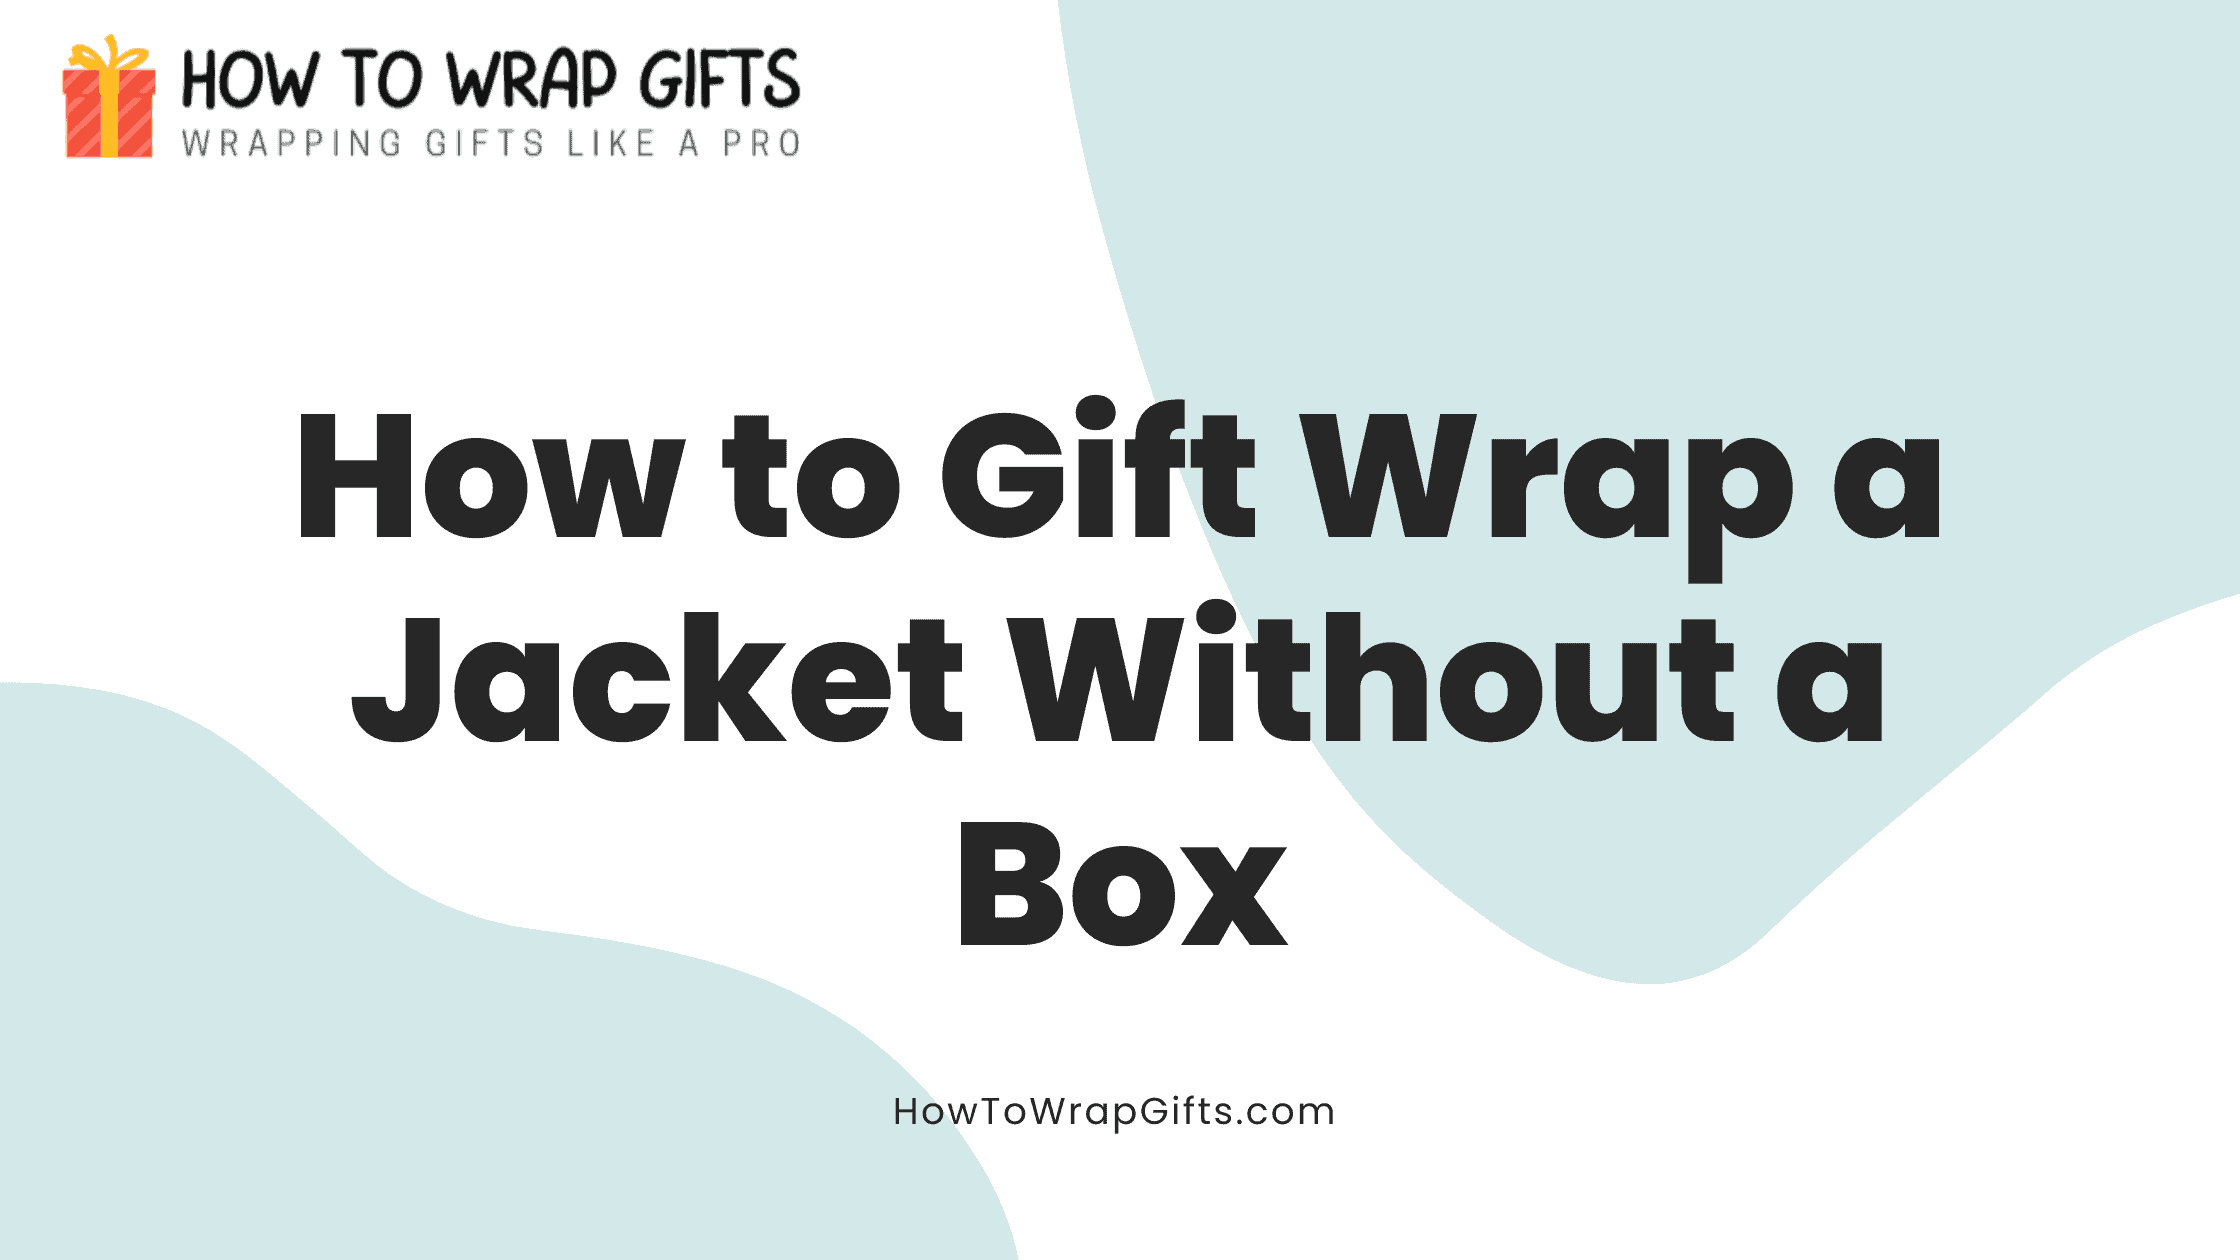 How to Gift Wrap a Jacket Without a Box